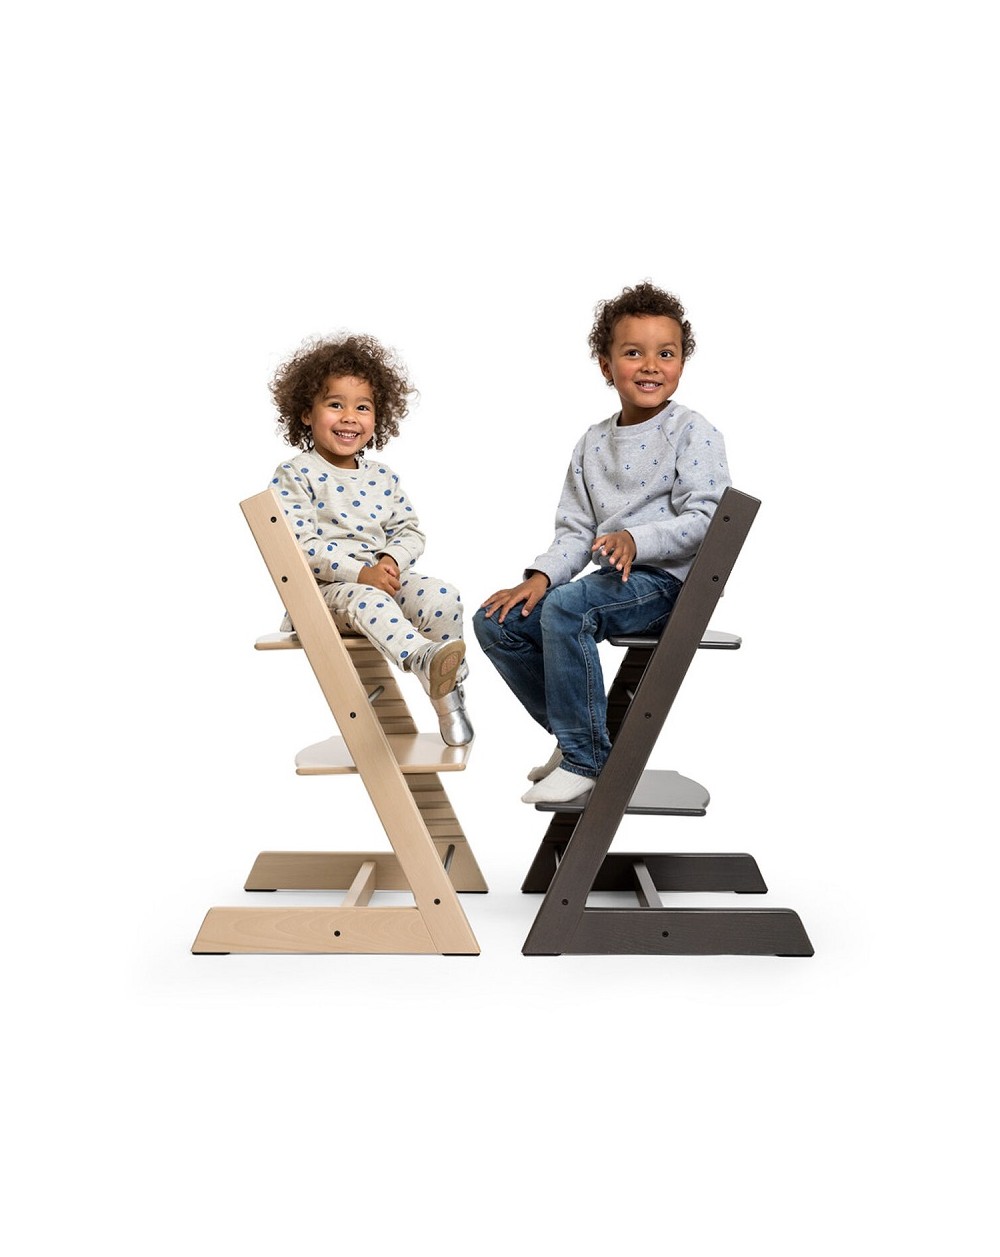 Stokke - Chaise Tripp Trapp - WhiteWhash